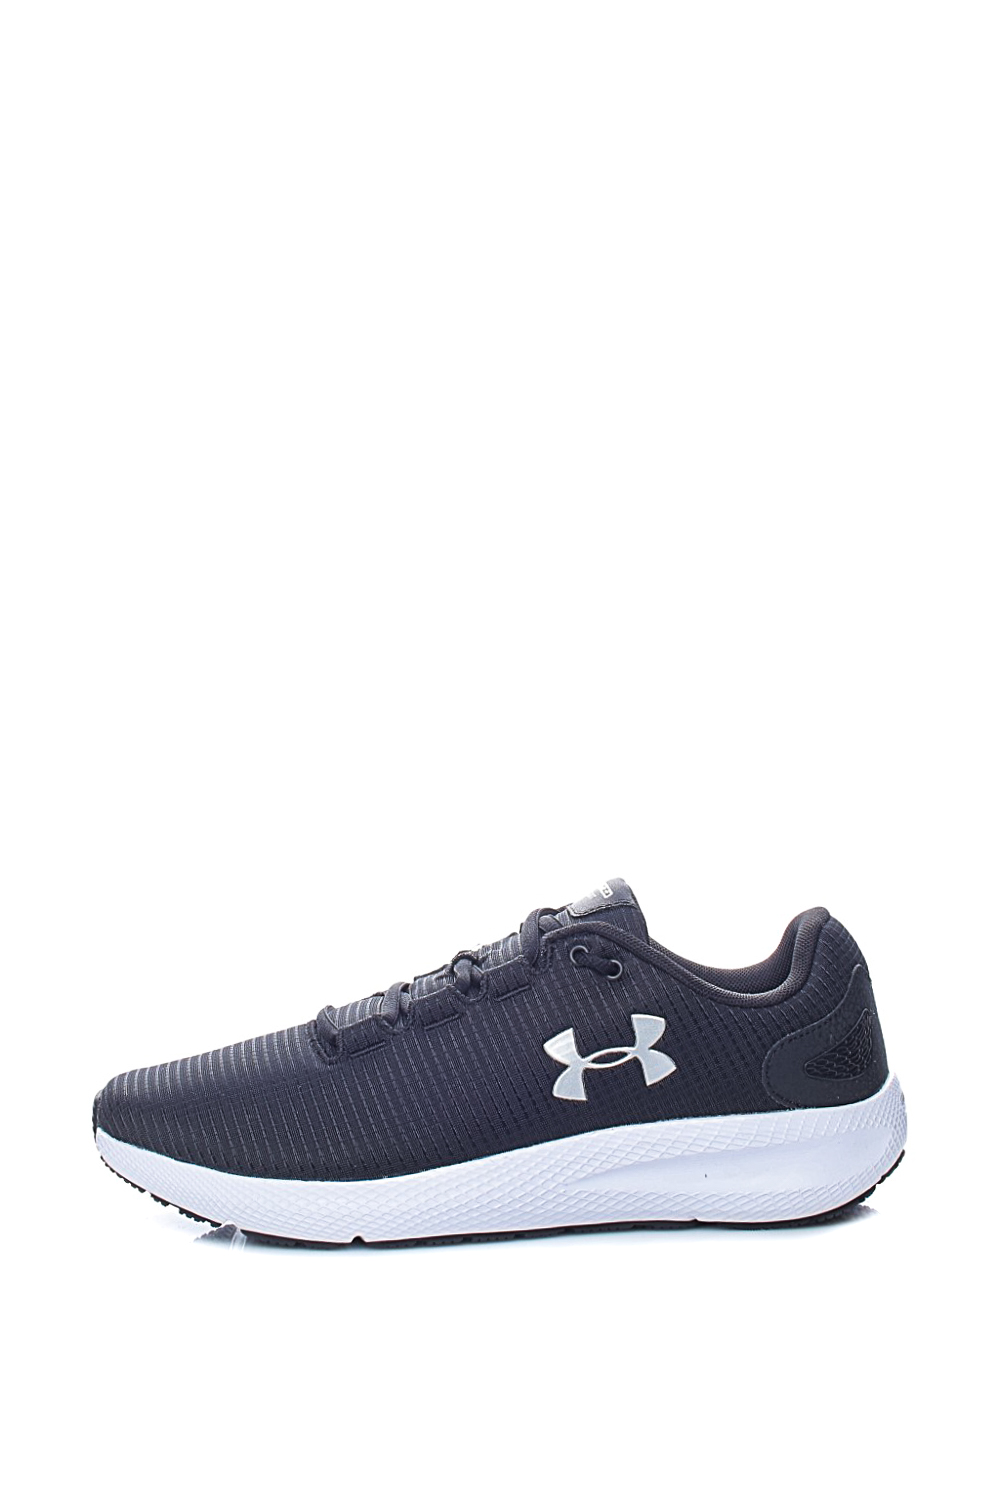 UNDER ARMOUR – Ανδρικά παπούτσια running UNDER ARMOUR Charged Pursuit 2 Rip μαύρα 1821801.0-7194